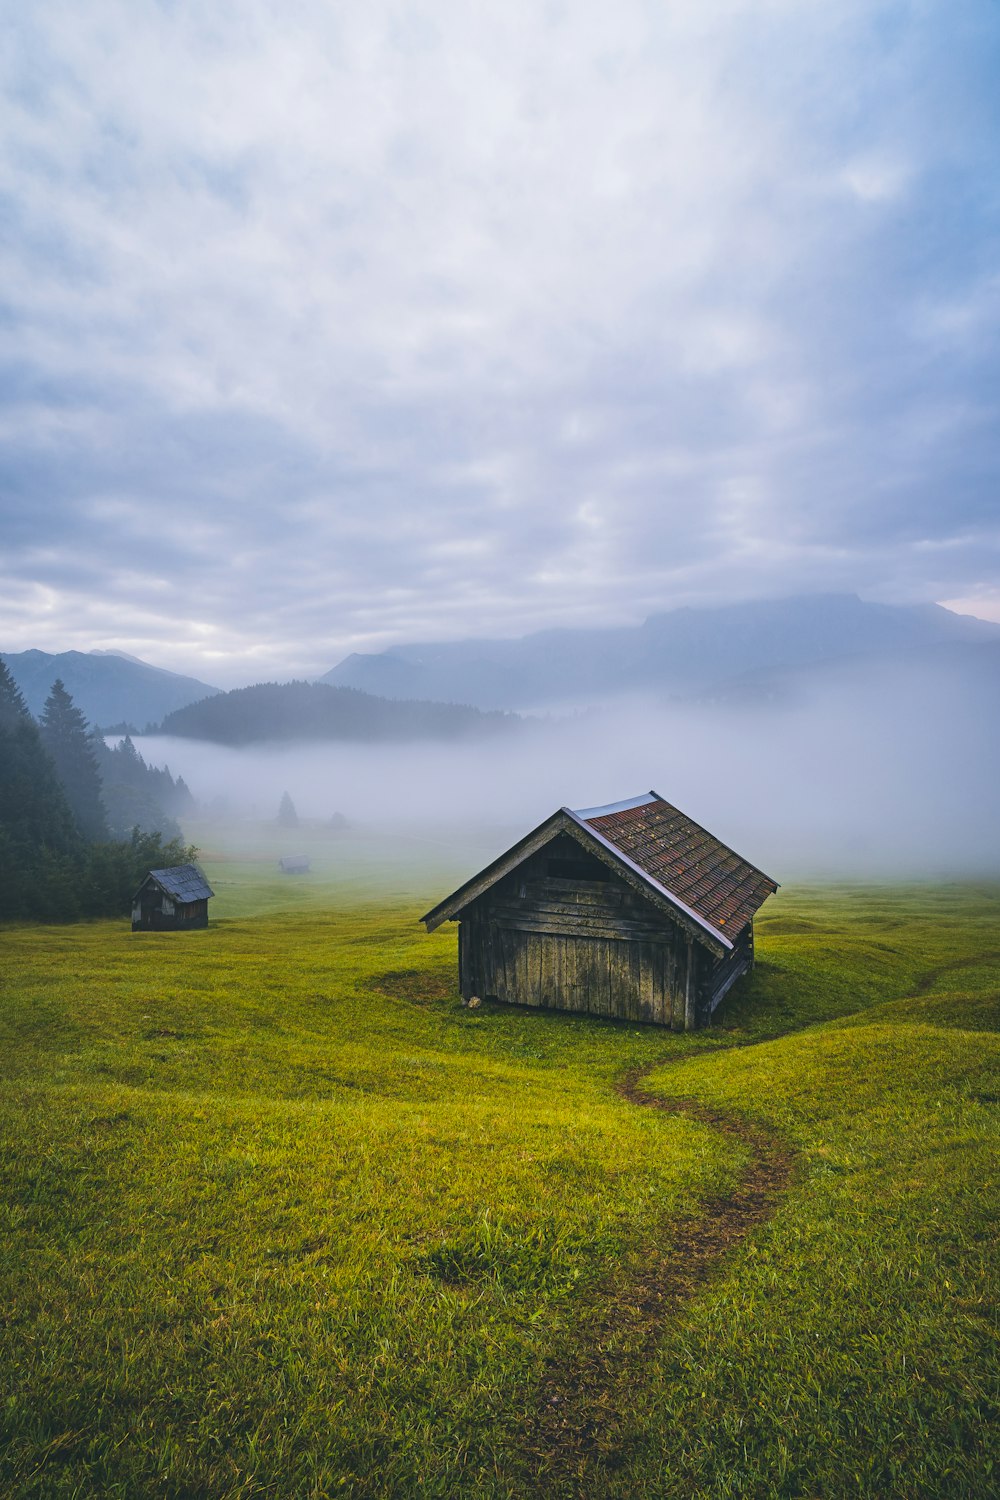 brown wooden house on green grass field near mountains under white clouds during daytime